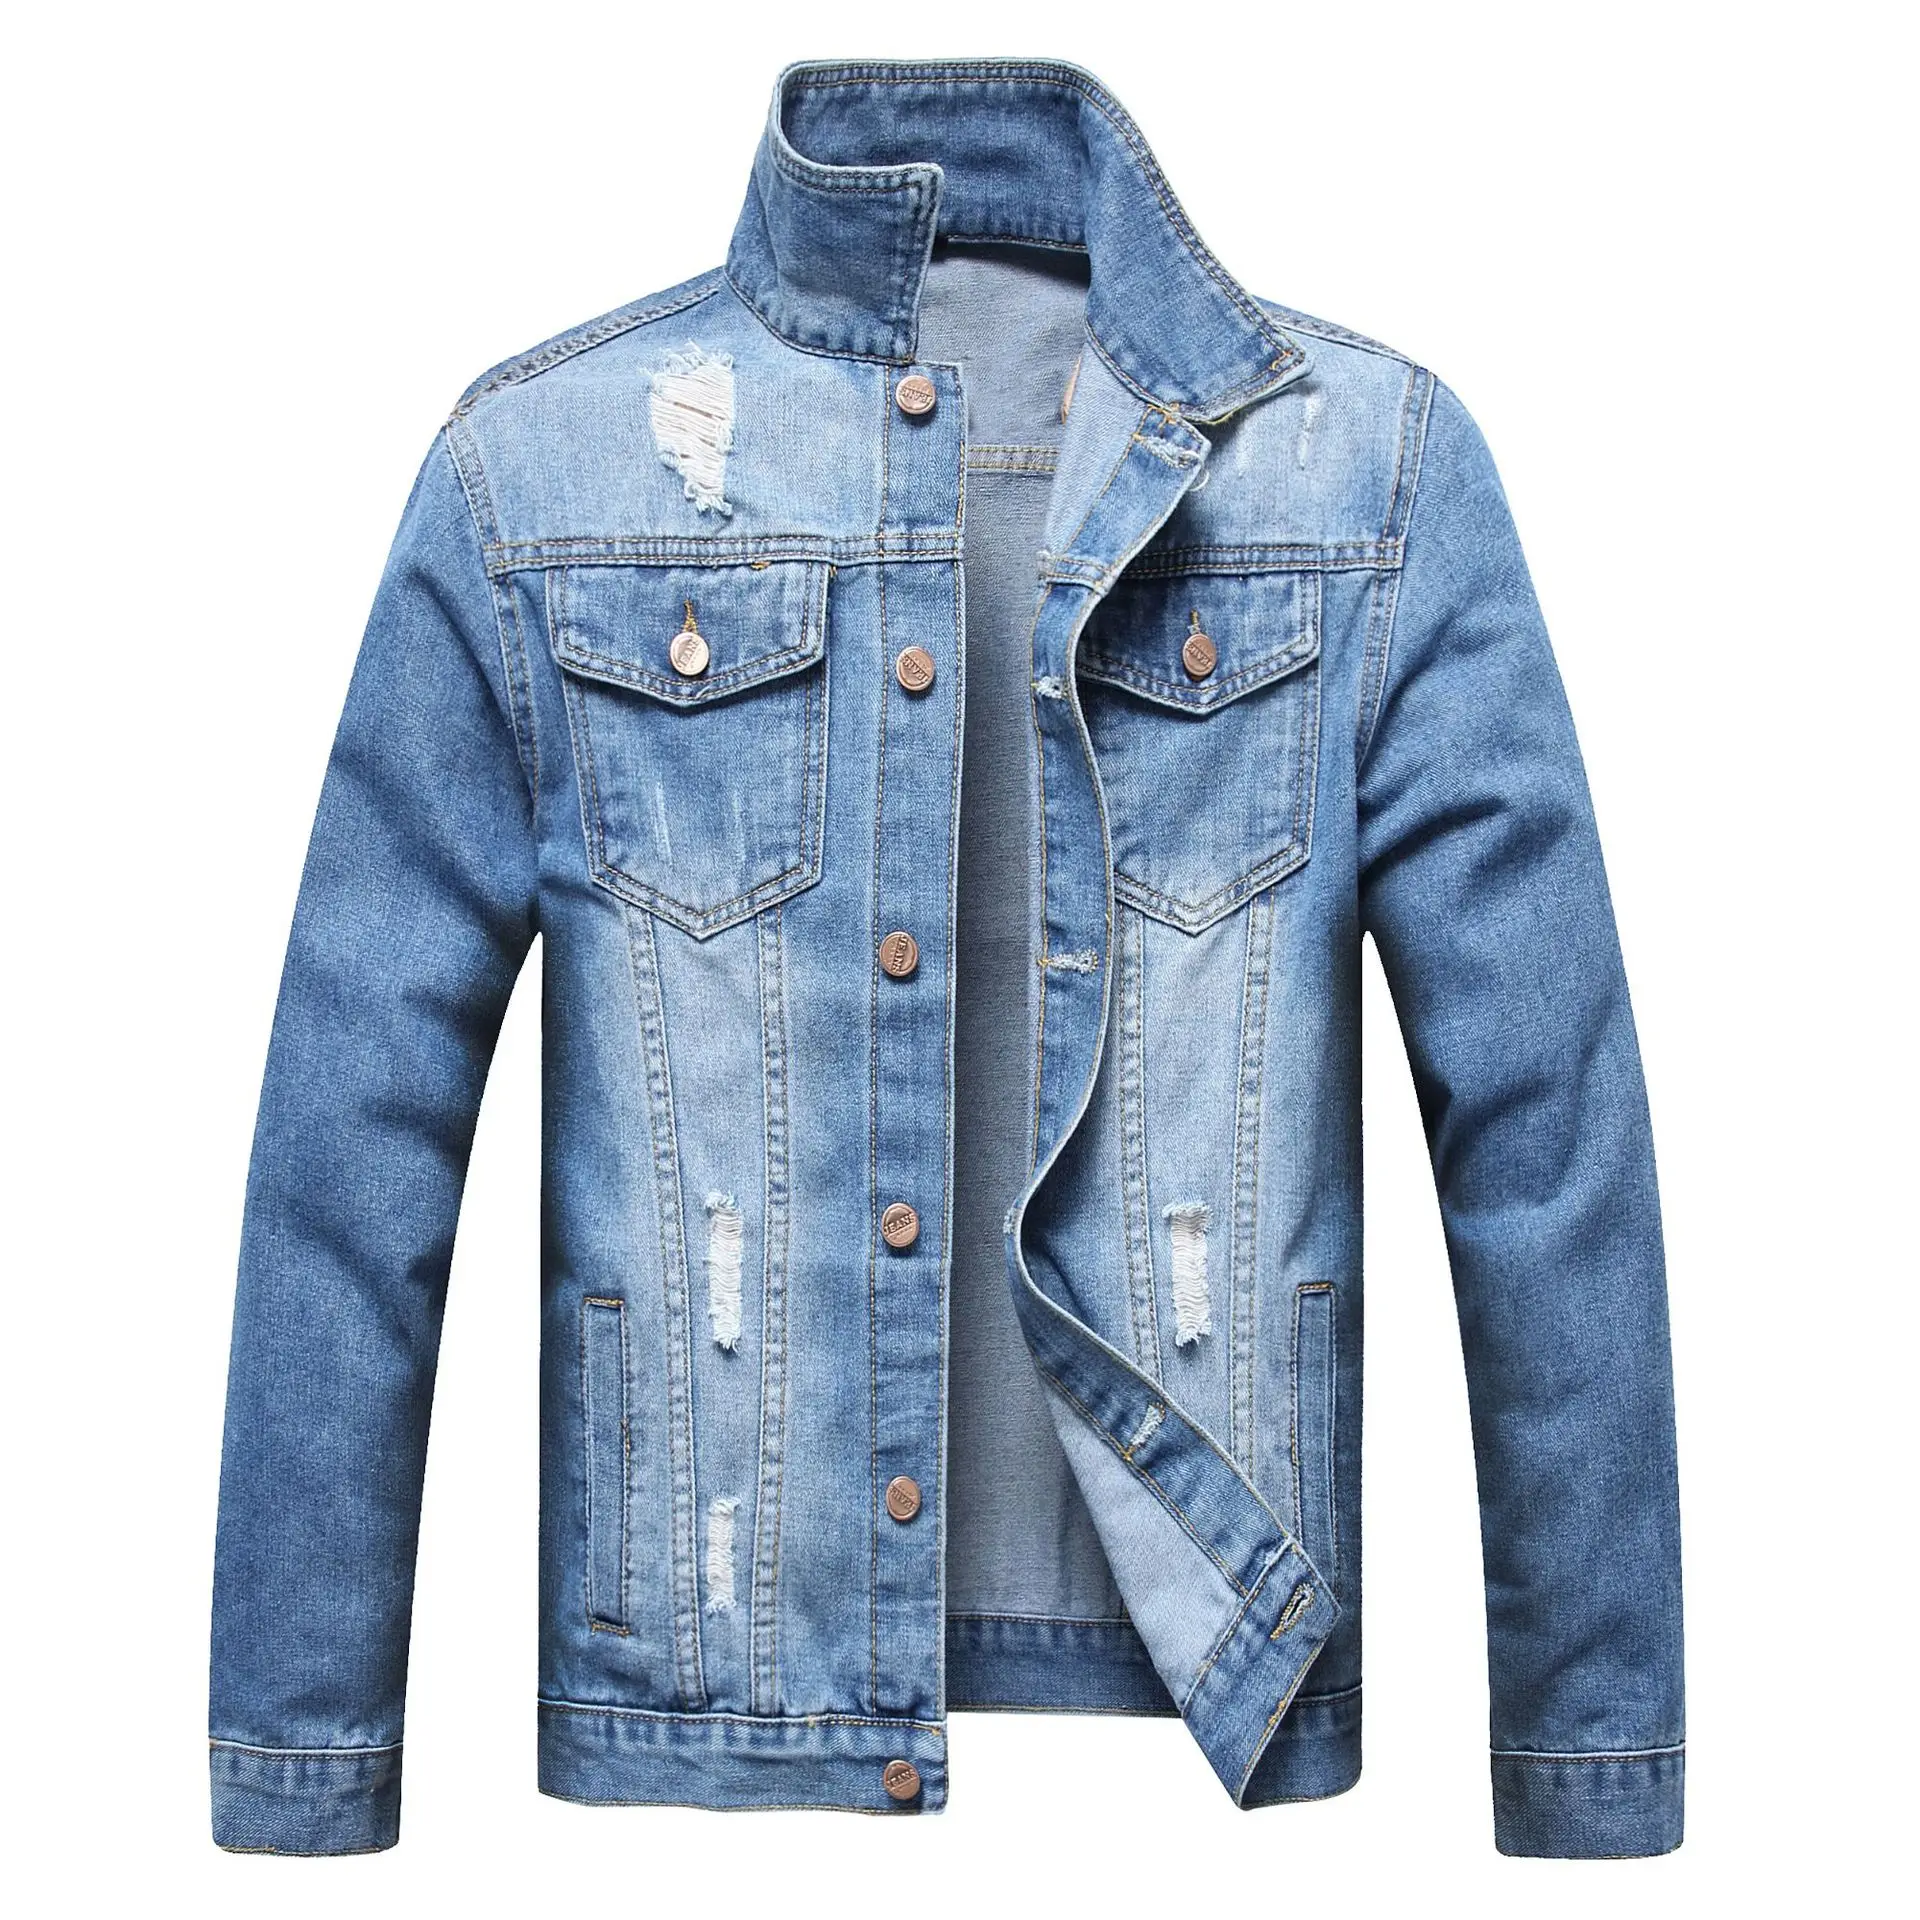 

Hot selling Classic Mens Denim Blue jean Jacket Trendy Fashion Ripped Denim Male Distressing Jackets Cowboy Coats, Light and med blue